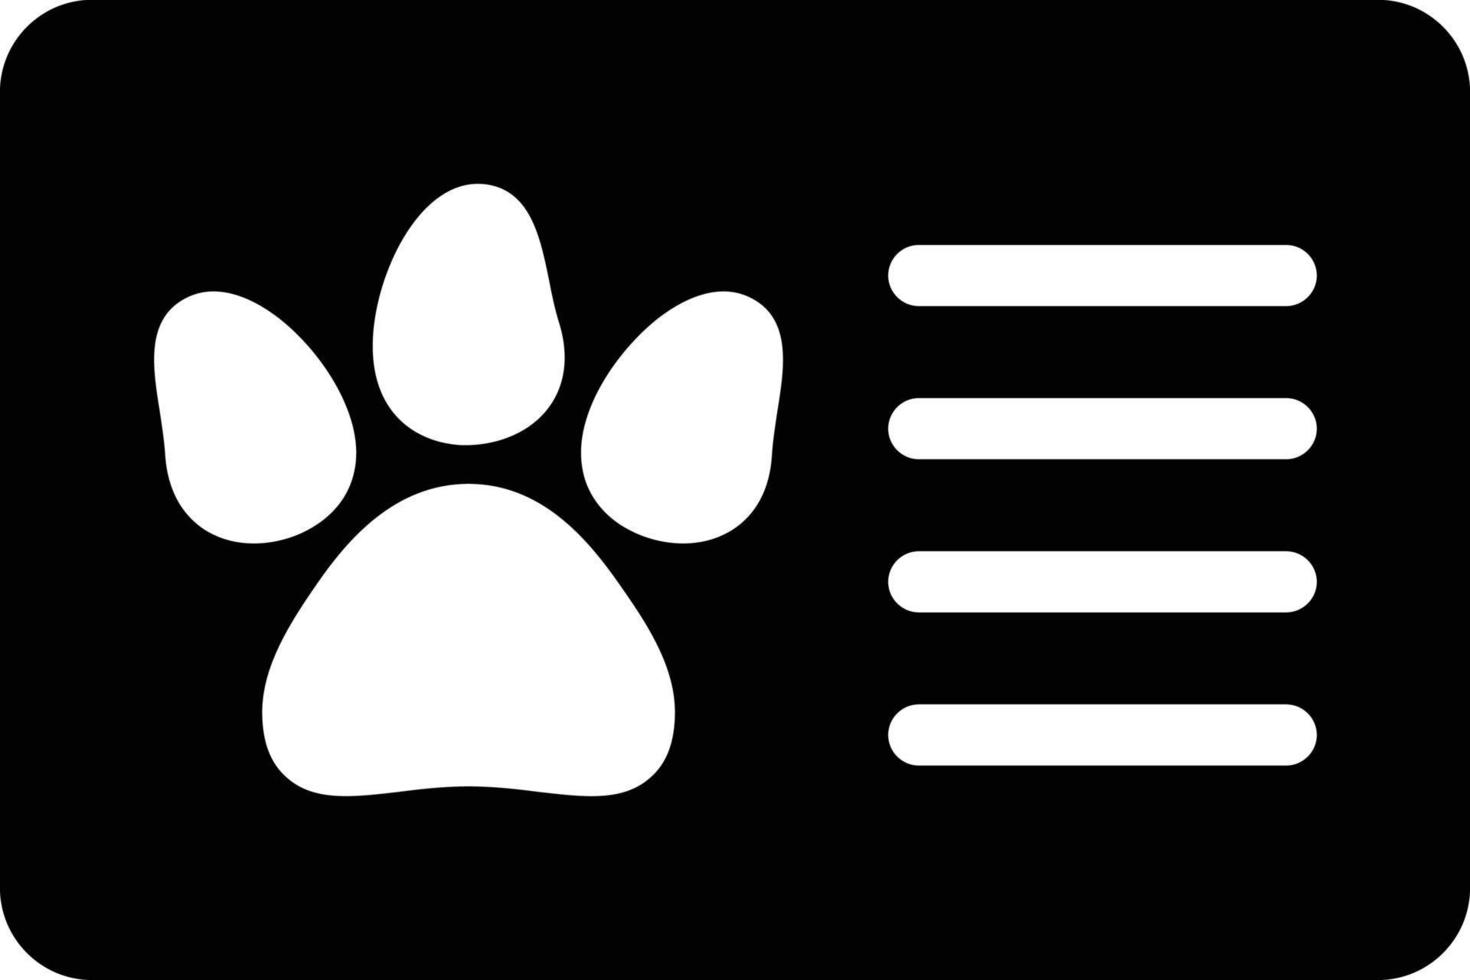 paw card vector illustration on a background.Premium quality symbols. vector icons for concept and graphic design.